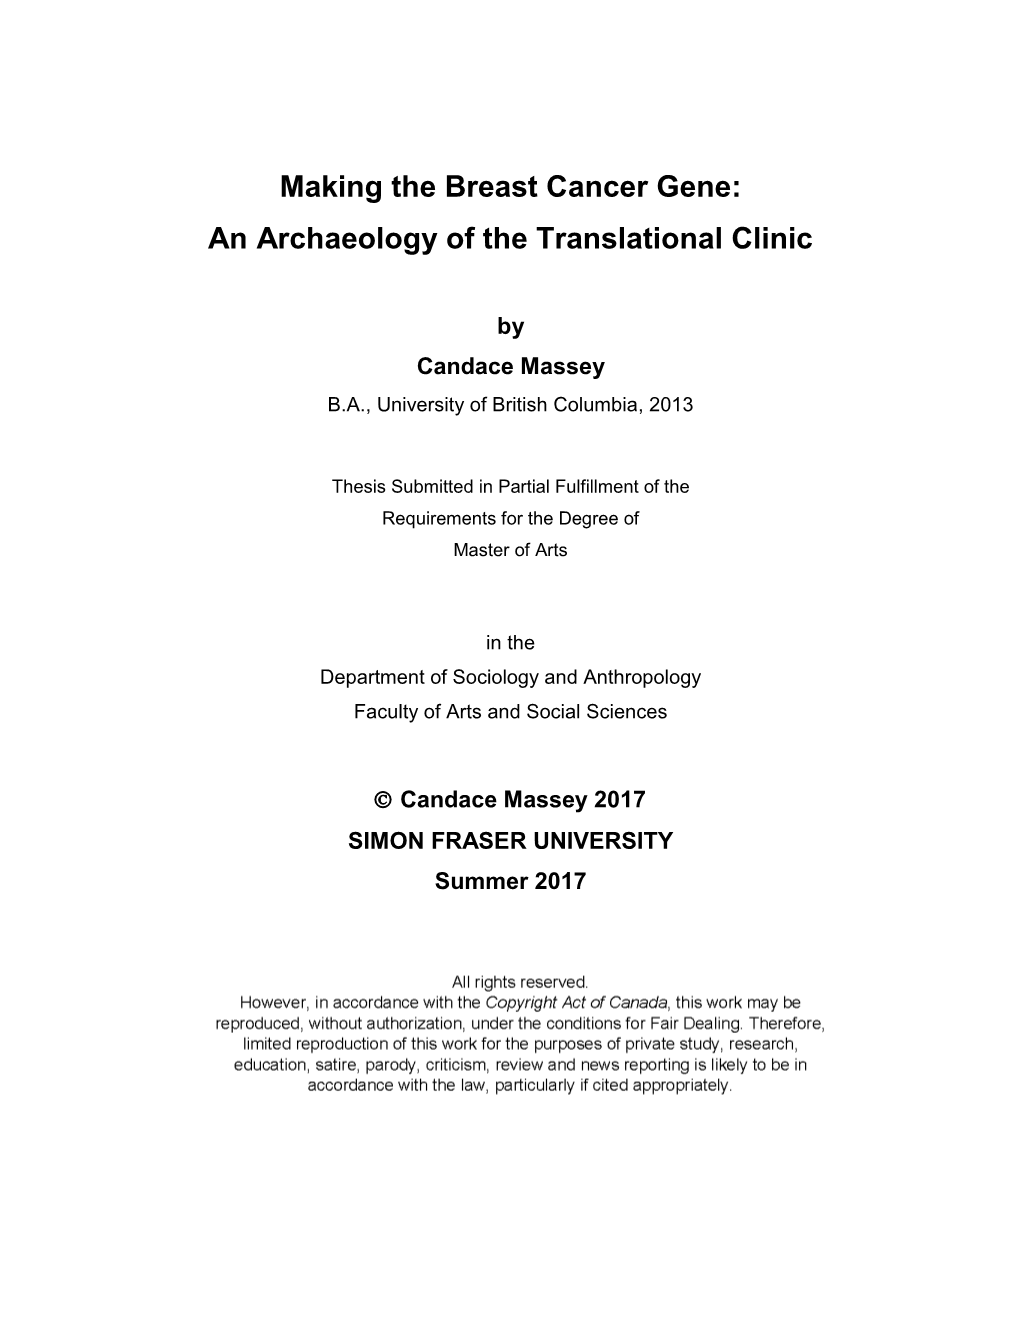 Making the Breast Cancer Gene: an Archaeology of the Translational Clinic